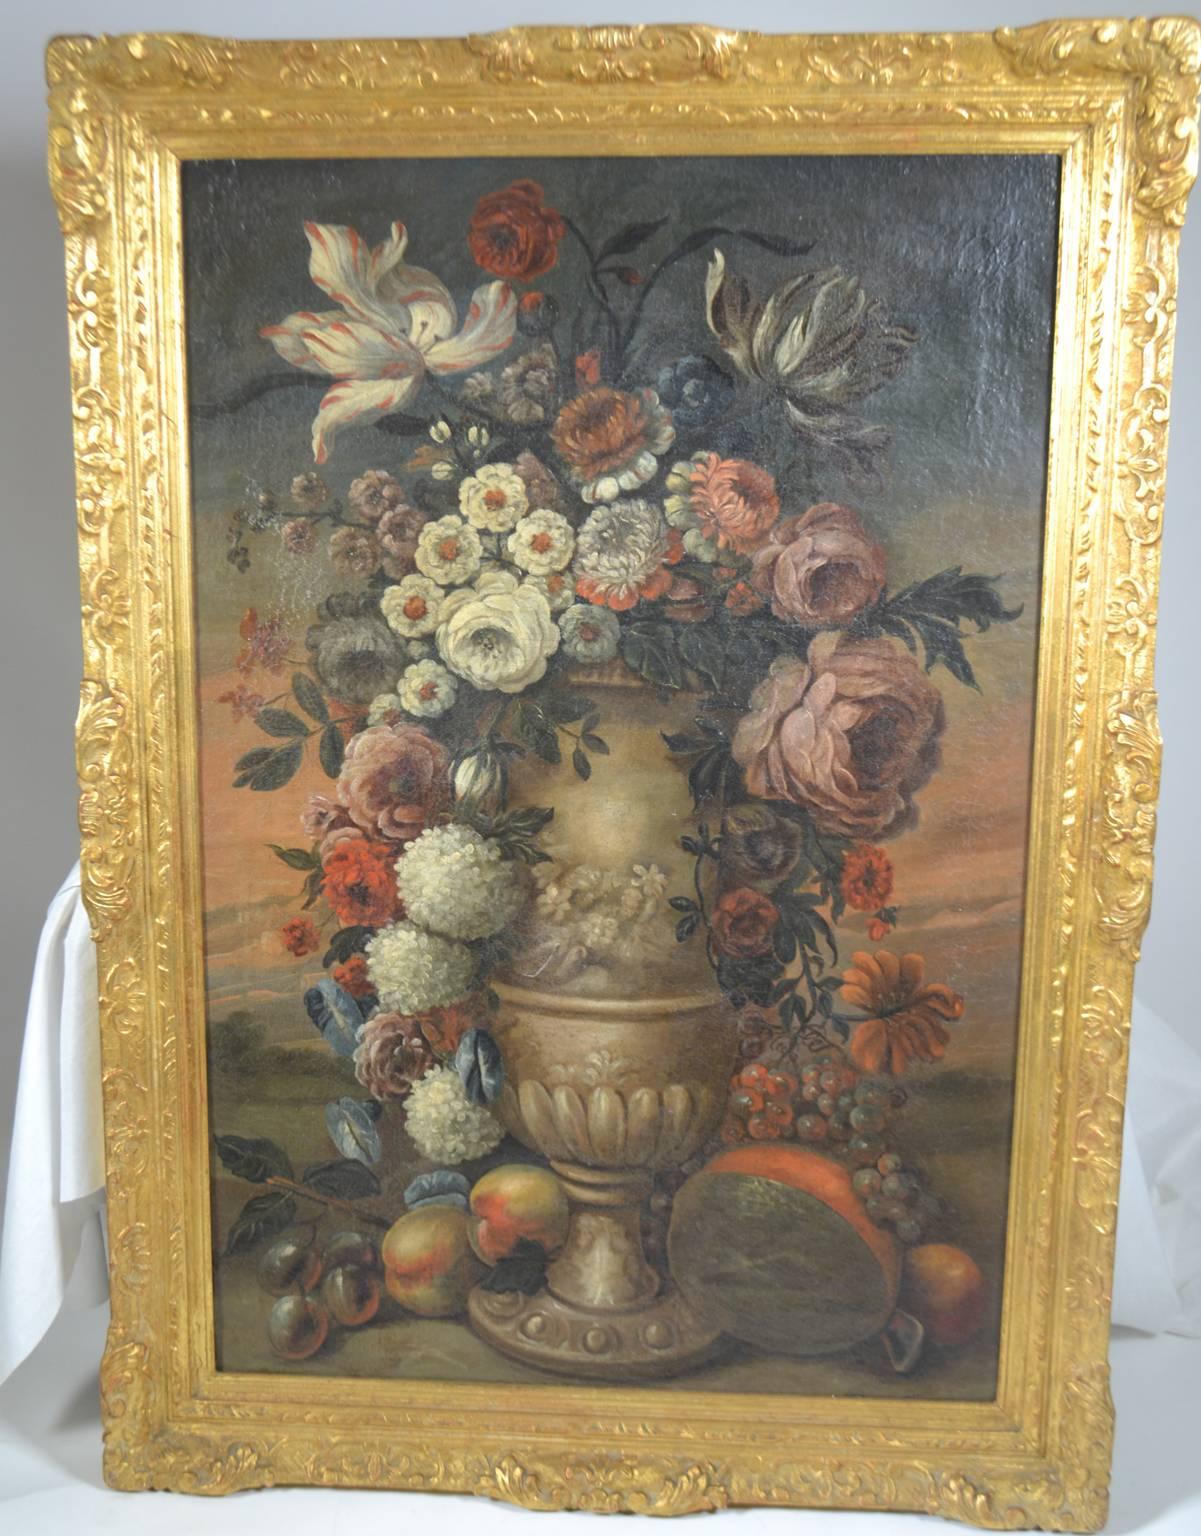 18th century framed flower painting of cascading flowers in an urn surrounded by fruit, oil on canvas, circa 1760-1780.